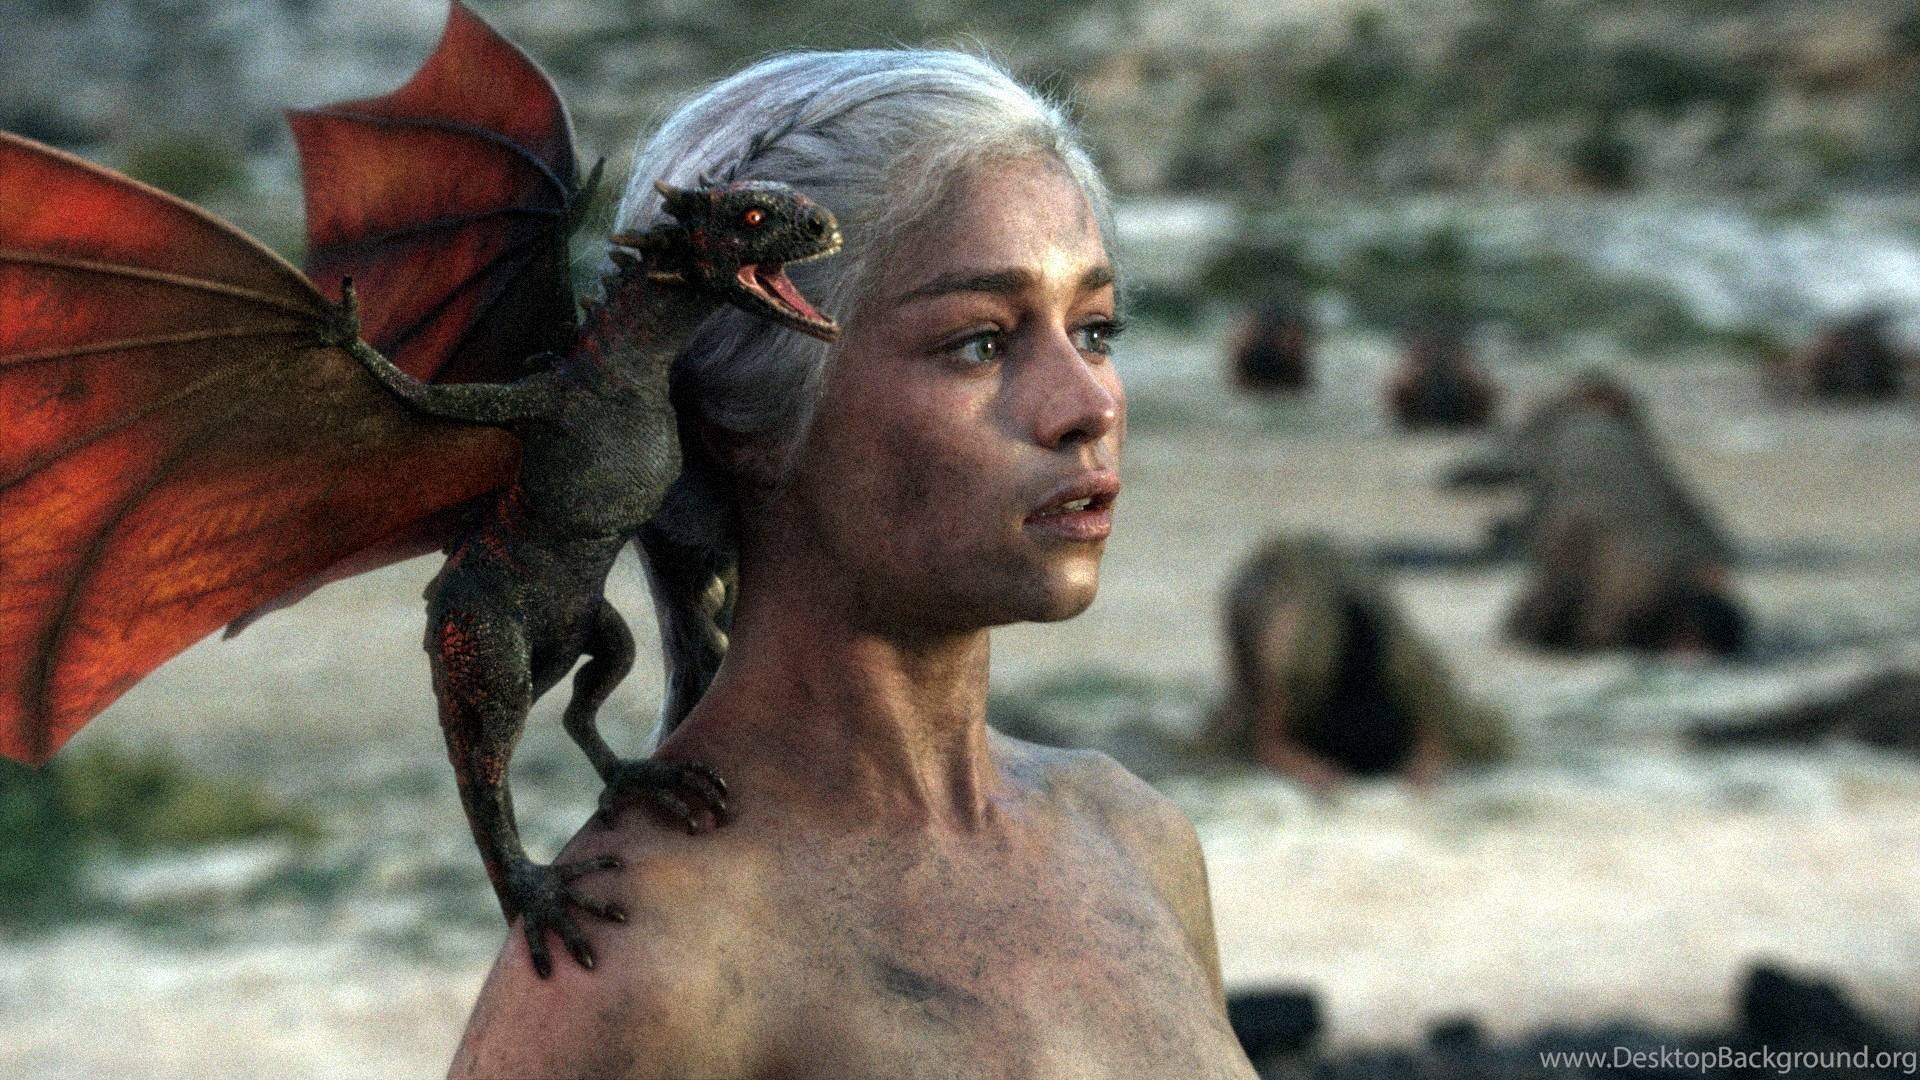 Best 10 Game Of Thrones Wallpaper Daenerys Dragons Pictures